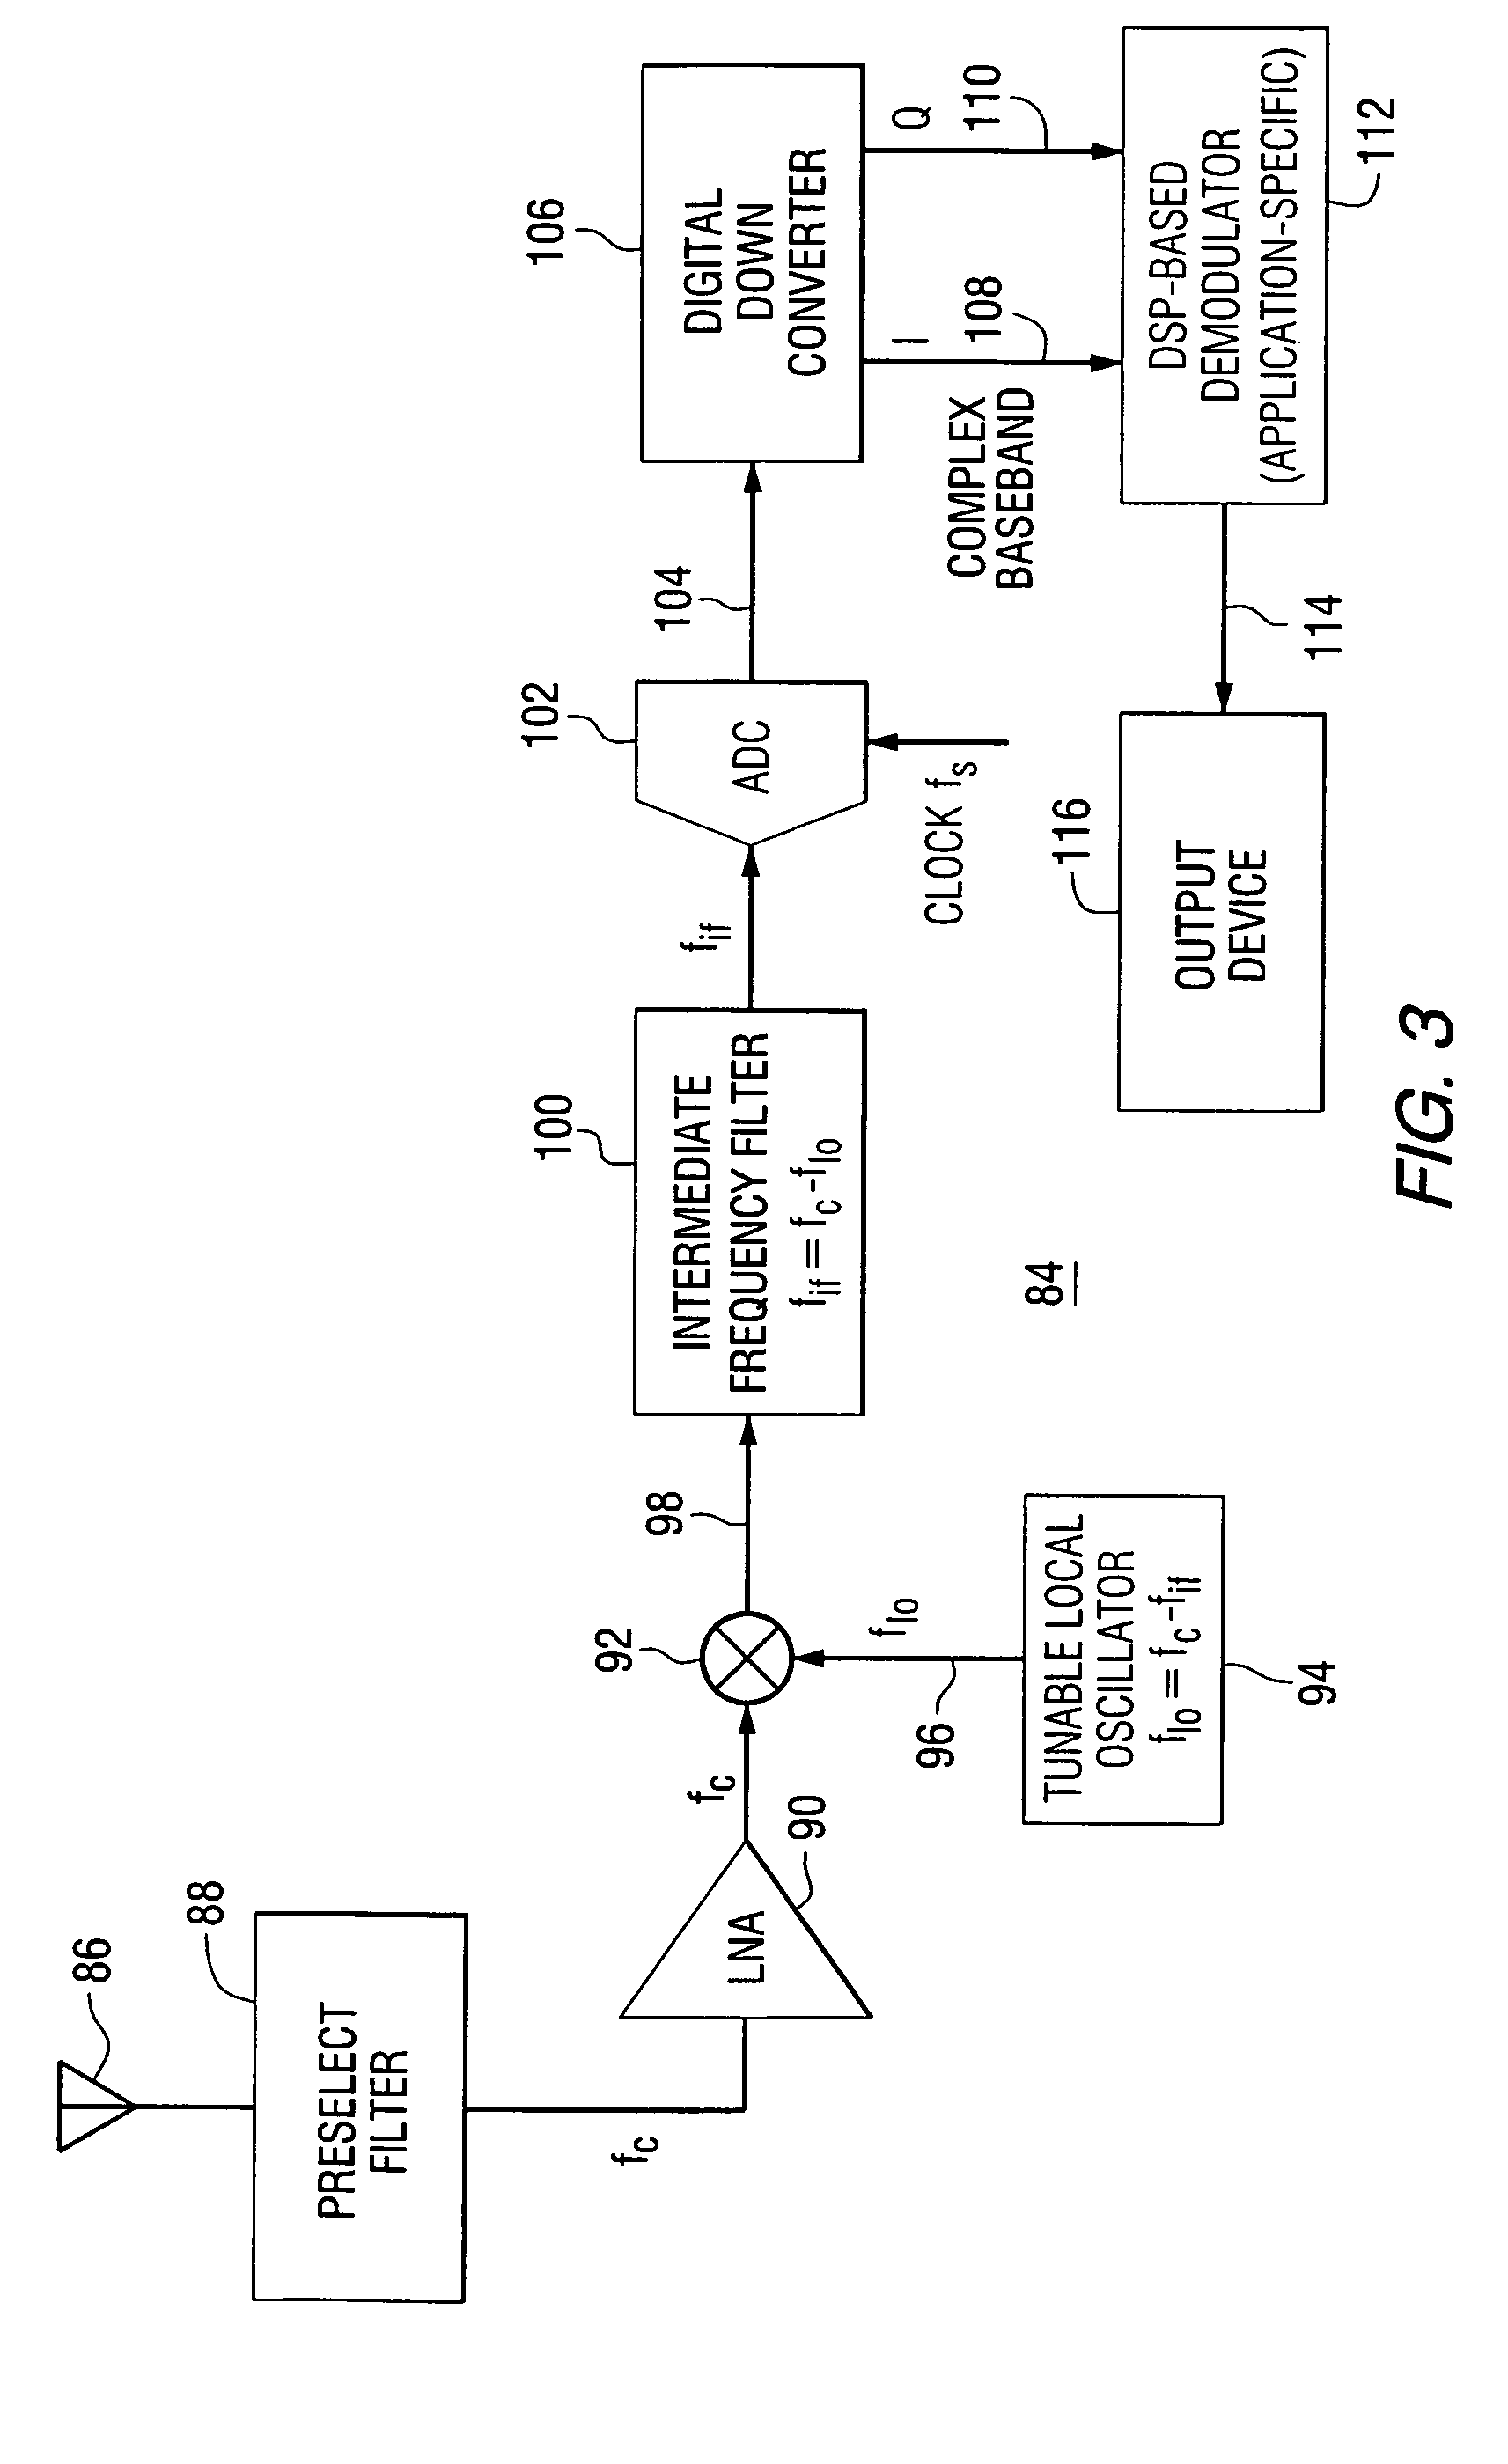 Equalizer for AM in-band on-channel radio receivers